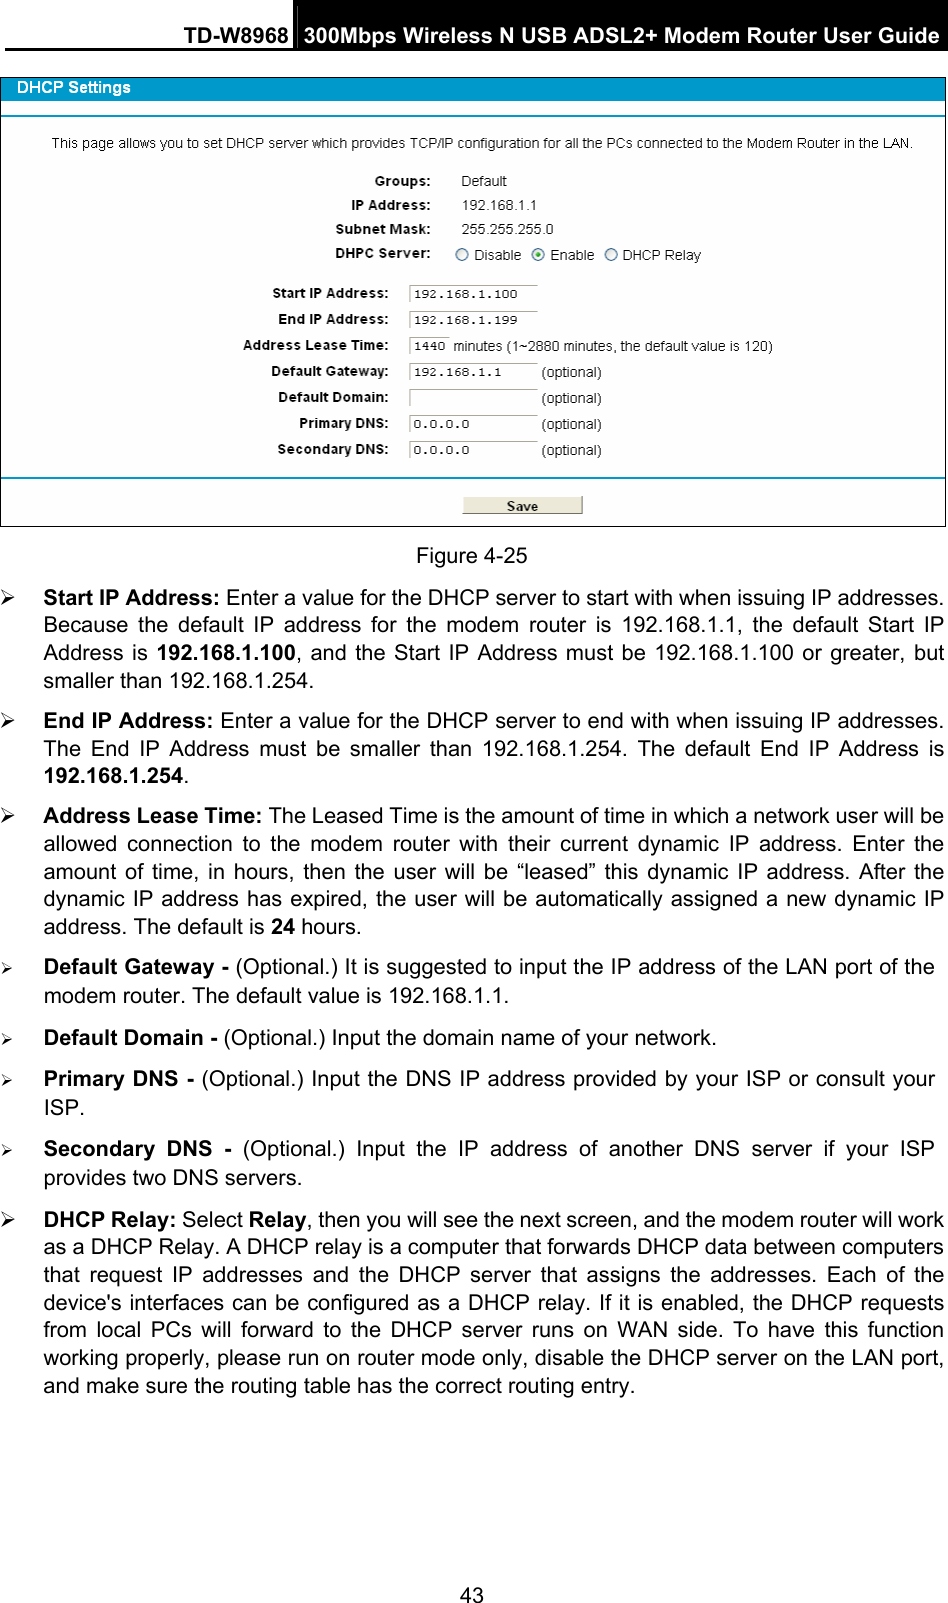 TD-W8968  300Mbps Wireless N USB ADSL2+ Modem Router User Guide 43  Figure 4-25 ¾ Start IP Address: Enter a value for the DHCP server to start with when issuing IP addresses. Because the default IP address for the modem router is 192.168.1.1, the default Start IP Address is 192.168.1.100, and the Start IP Address must be 192.168.1.100 or greater, but smaller than 192.168.1.254. ¾ End IP Address: Enter a value for the DHCP server to end with when issuing IP addresses. The End IP Address must be smaller than 192.168.1.254. The default End IP Address is 192.168.1.254. ¾ Address Lease Time: The Leased Time is the amount of time in which a network user will be allowed connection to the modem router with their current dynamic IP address. Enter the amount of time, in hours, then the user will be “leased” this dynamic IP address. After the dynamic IP address has expired, the user will be automatically assigned a new dynamic IP address. The default is 24 hours. ¾ Default Gateway - (Optional.) It is suggested to input the IP address of the LAN port of the modem router. The default value is 192.168.1.1. ¾ Default Domain - (Optional.) Input the domain name of your network. ¾ Primary DNS - (Optional.) Input the DNS IP address provided by your ISP or consult your ISP. ¾ Secondary DNS - (Optional.) Input the IP address of another DNS server if your ISP provides two DNS servers. ¾ DHCP Relay: Select Relay, then you will see the next screen, and the modem router will work as a DHCP Relay. A DHCP relay is a computer that forwards DHCP data between computers that request IP addresses and the DHCP server that assigns the addresses. Each of the device&apos;s interfaces can be configured as a DHCP relay. If it is enabled, the DHCP requests from local PCs will forward to the DHCP server runs on WAN side. To have this function working properly, please run on router mode only, disable the DHCP server on the LAN port, and make sure the routing table has the correct routing entry. 